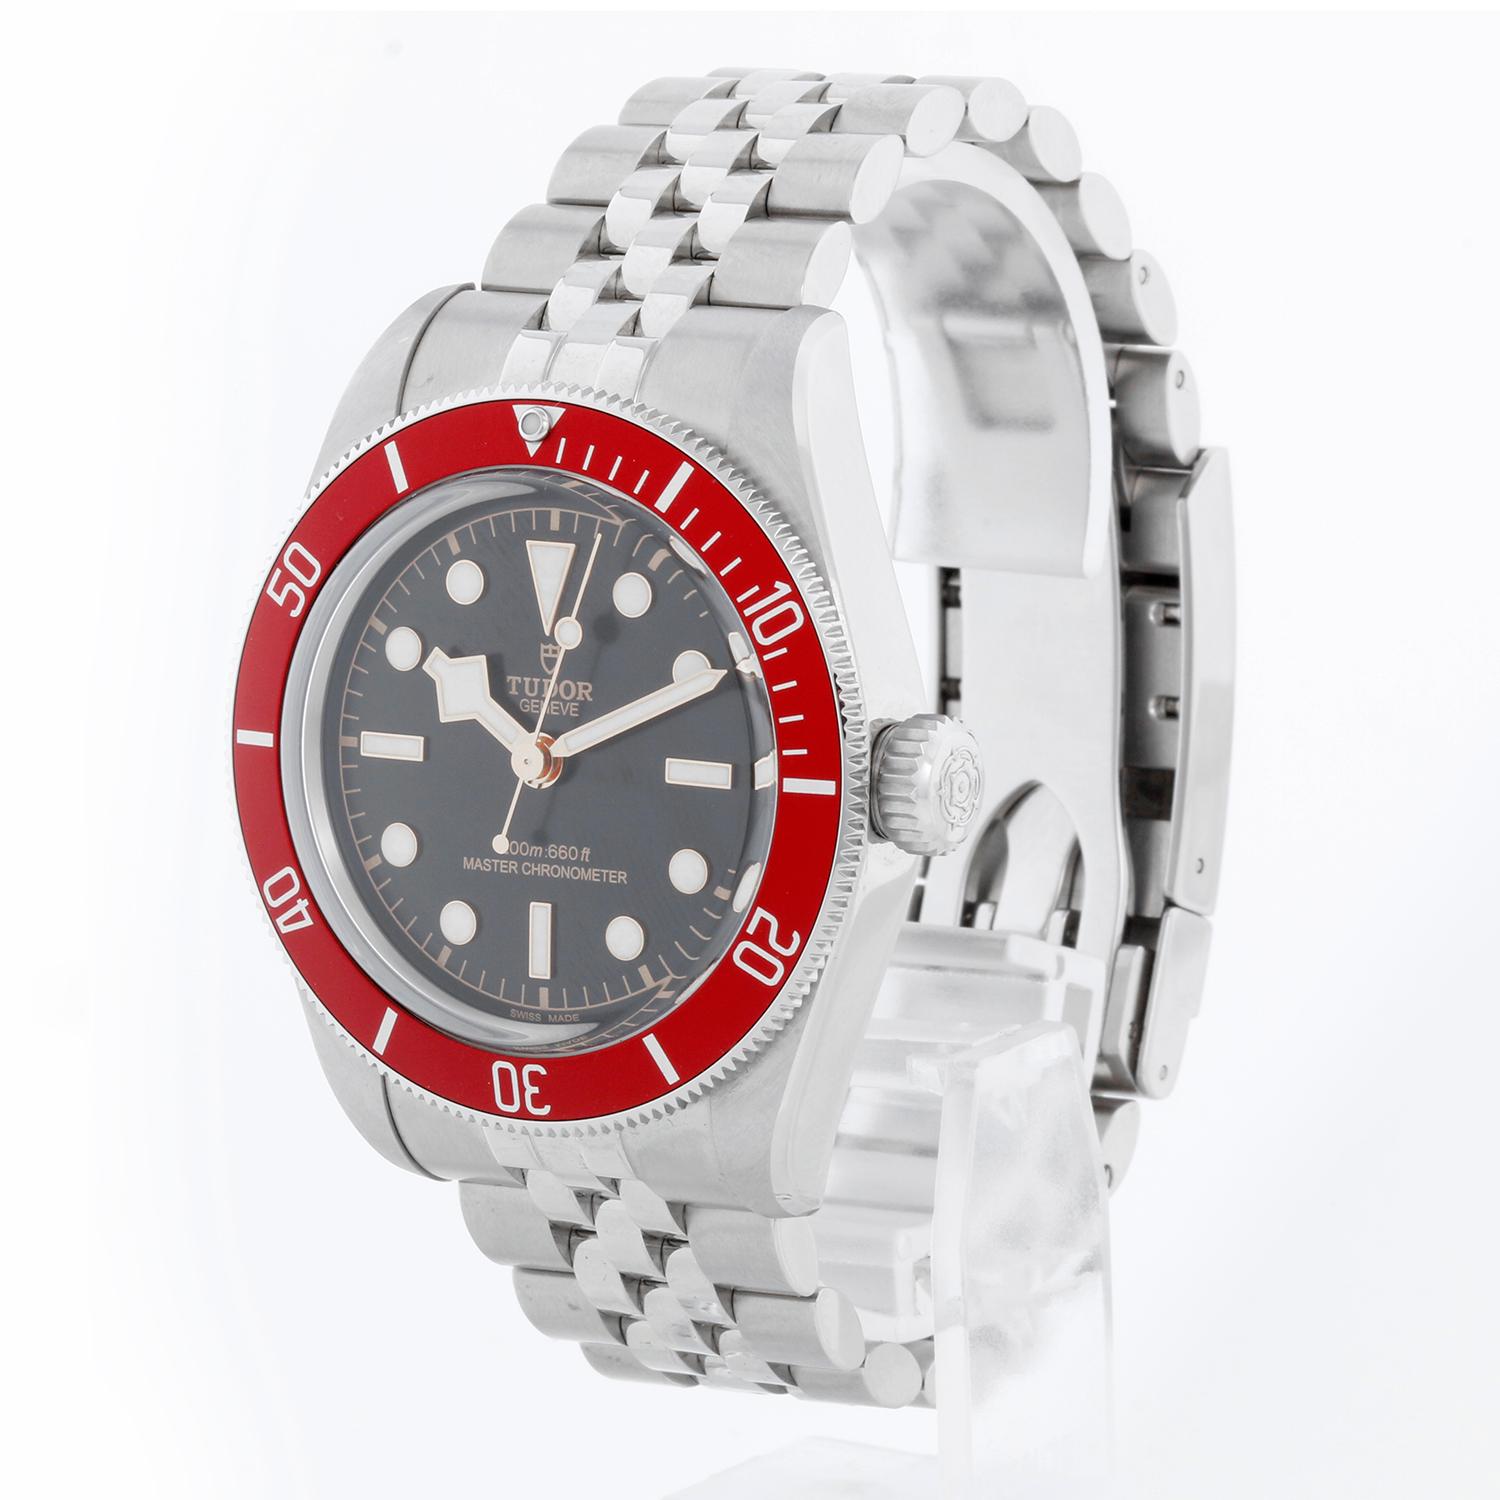 Tudor Black Bay Burgundy Men's Stainless Steel Watch 7941A1A0RU - Automatic winding. Stainless steel case with rotating bezel; burgundy bezel insert (41mm diameter). Black dial with luminous-style hour markers. Steel Jubilee bracelet with spring